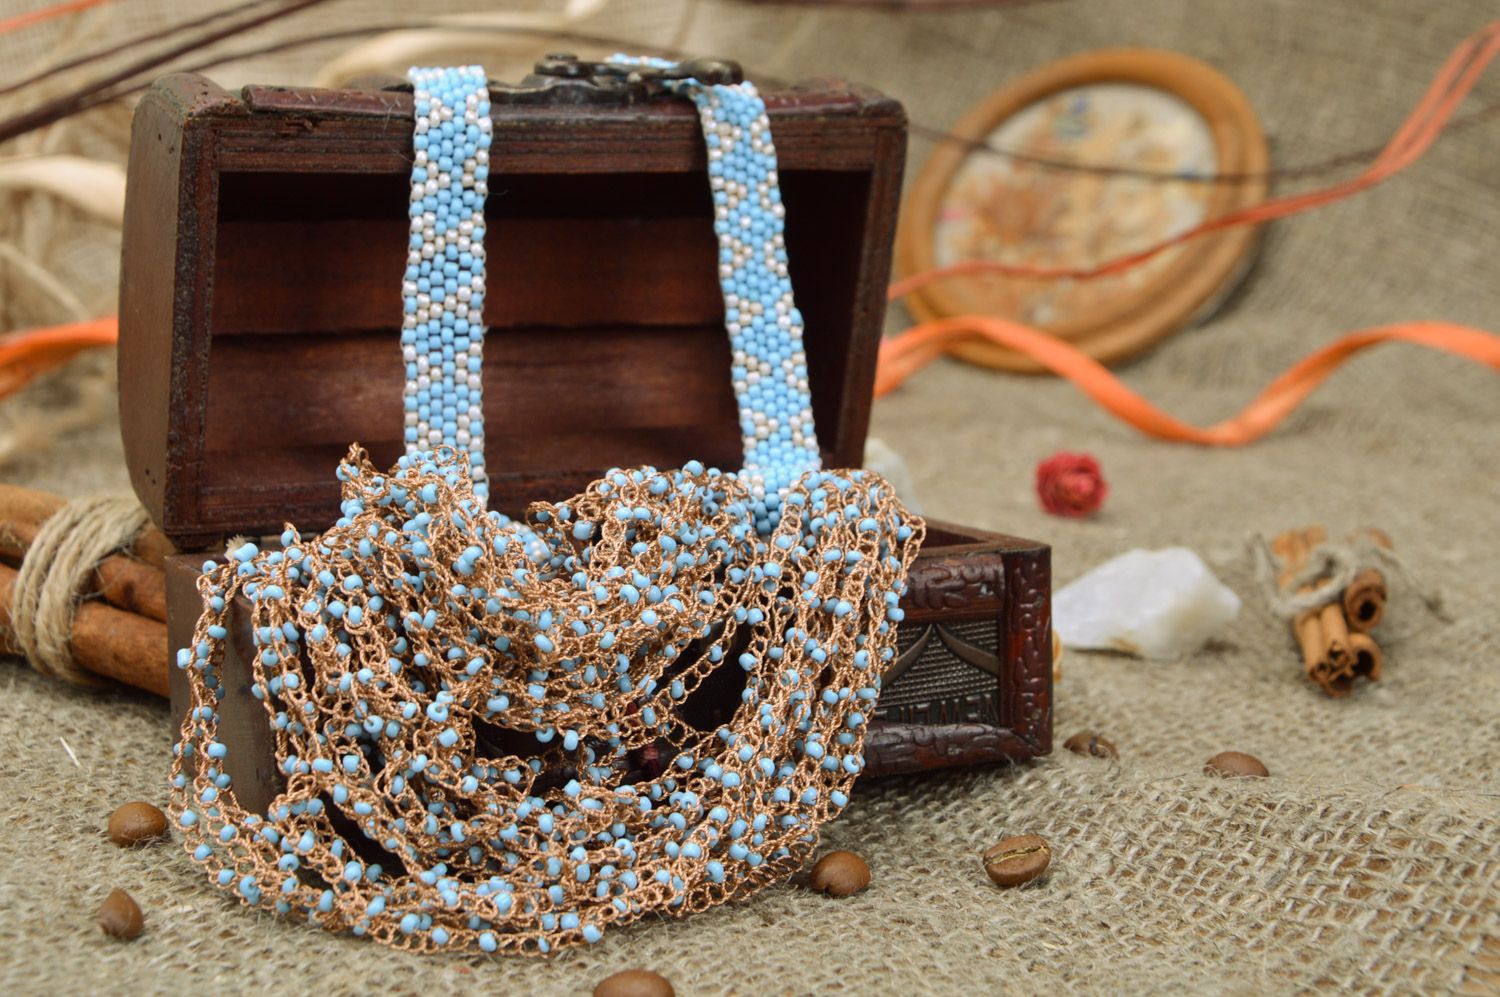 Handmade airy volume necklace woven of blue and brown beads and fishing line photo 1